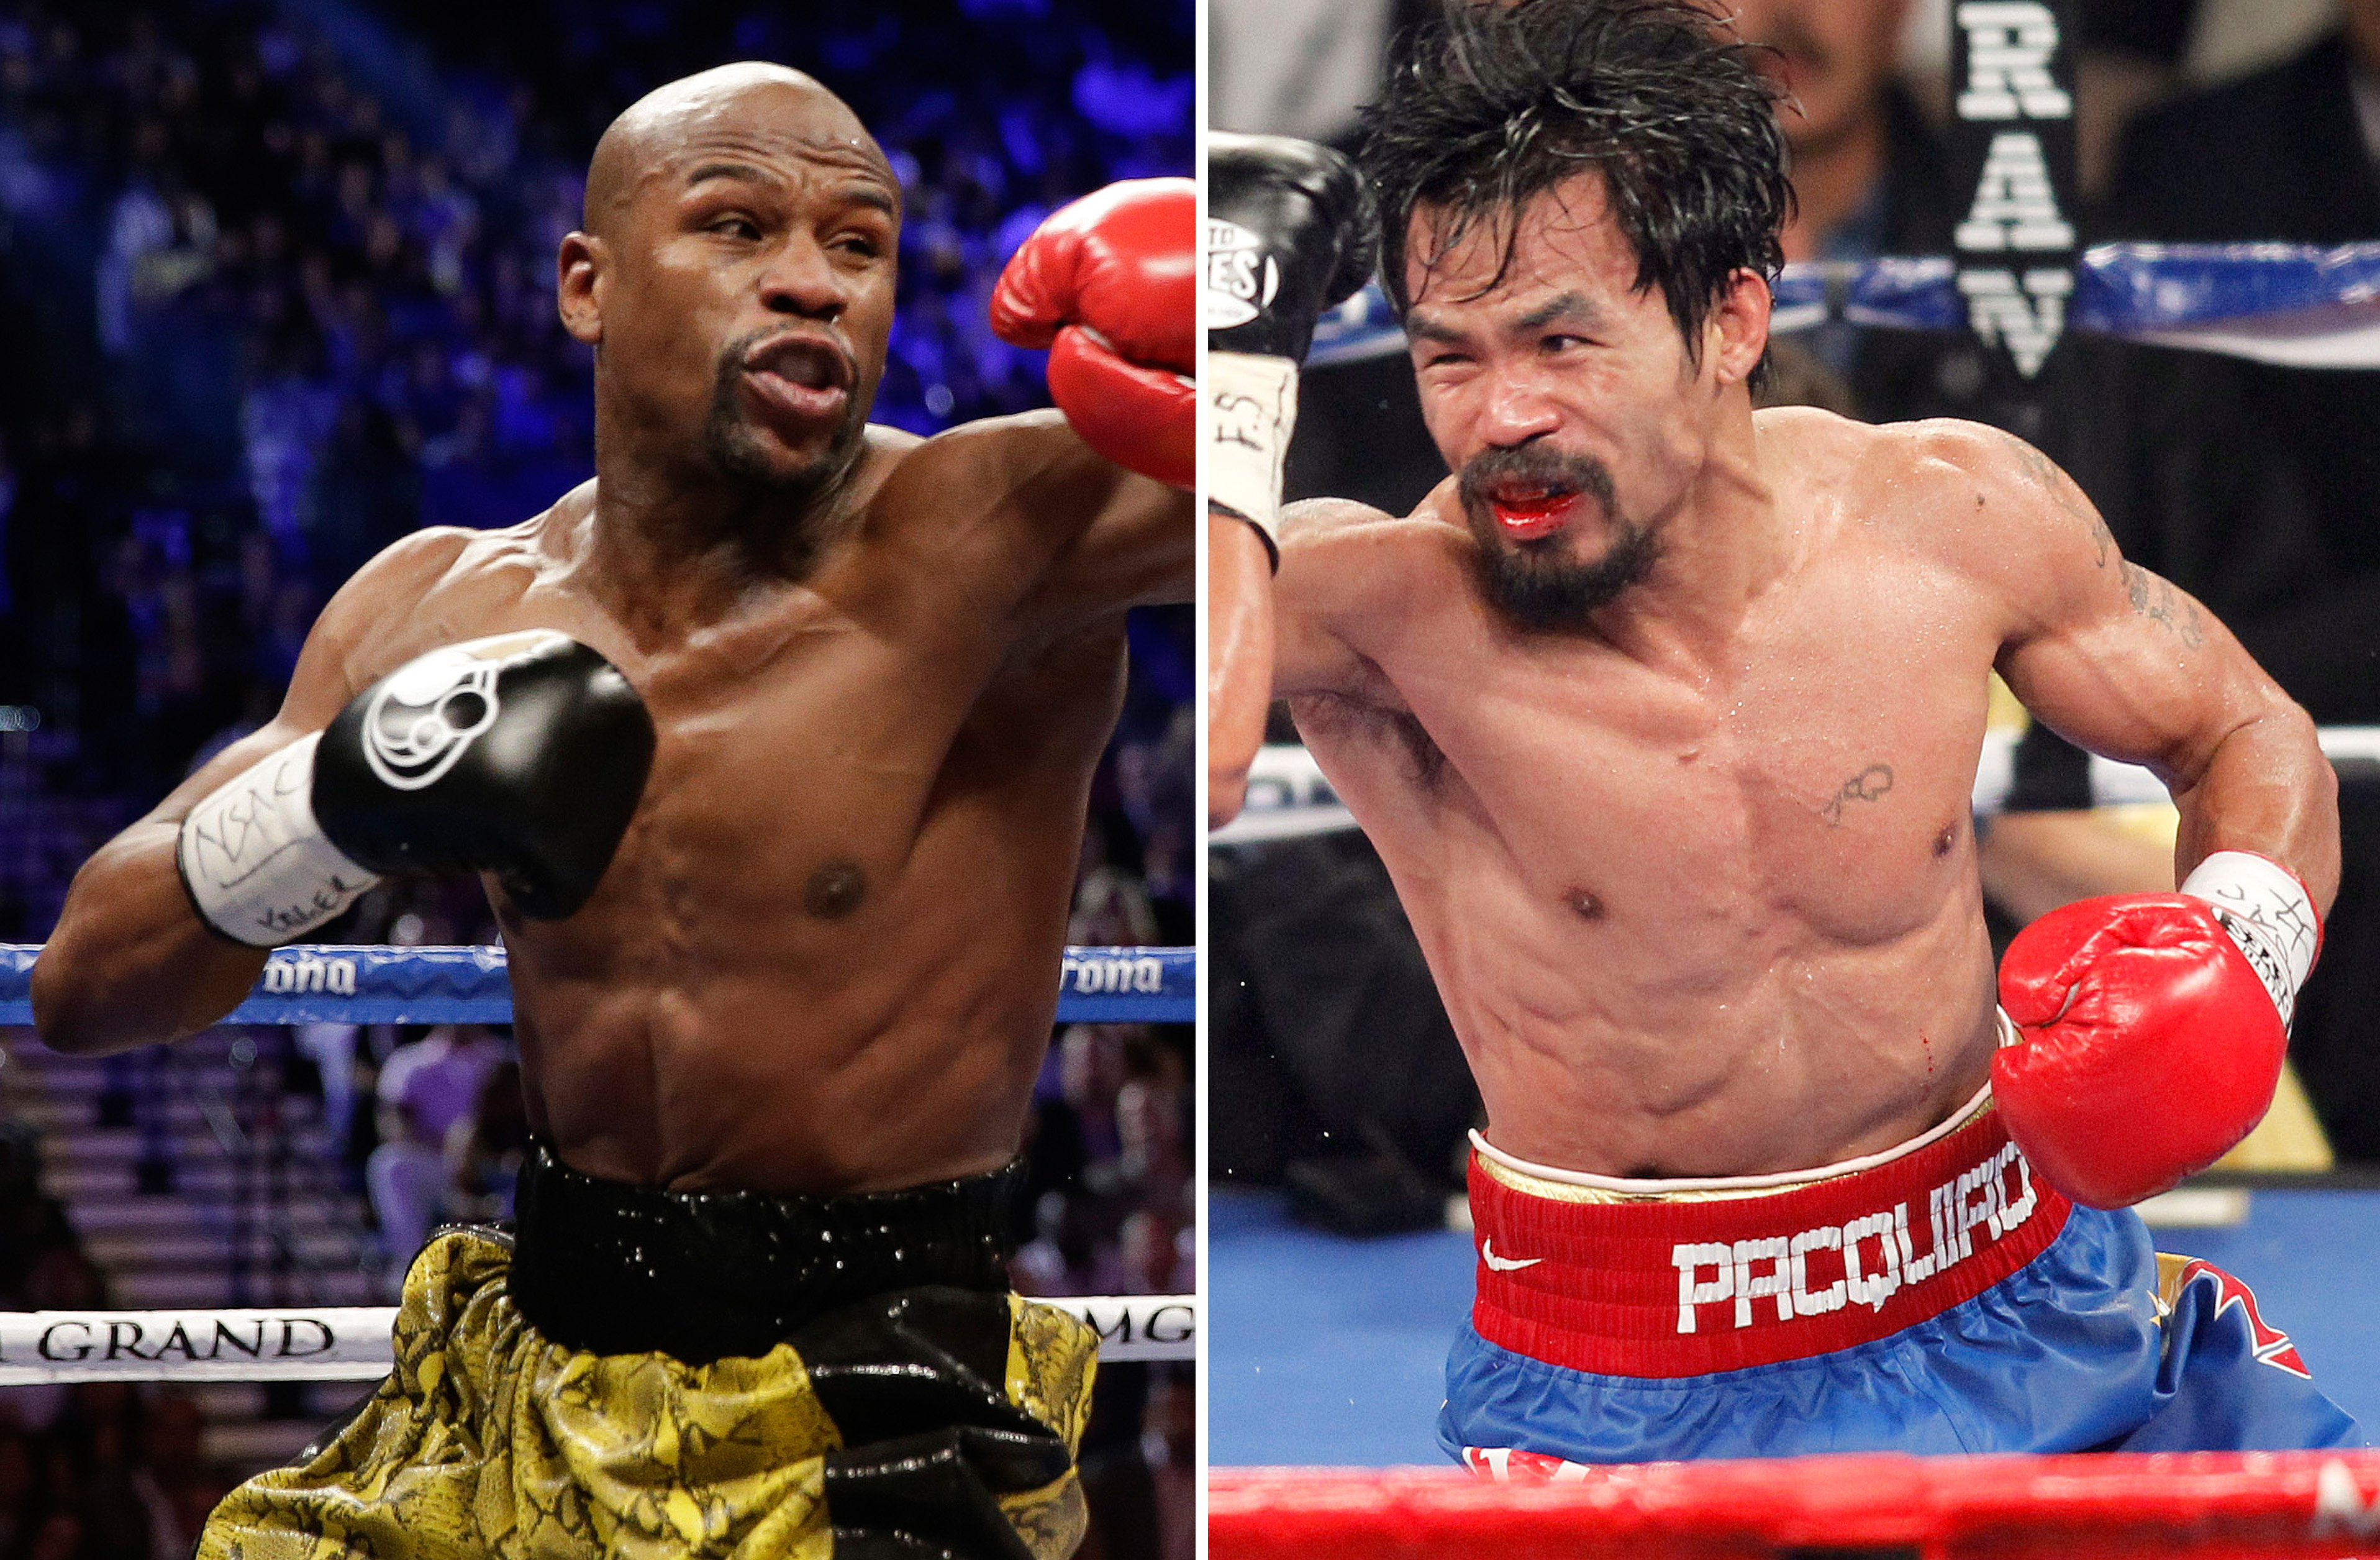 Floyd Mayweather Jr. (left) exchanges punches with Robert Guerrero (not shown) in a WBC welterweight title fight in Las Vegas on May 4, 2013. At right, in a Nov. 12, 2011 photo, Manny Pacquiao exchanges punches with Juan Manuel Marquez (not shown) during a WBO welterweight title fight in Las Vegas. Floyd Mayweather Jr. and Manny Pacquiao are about to face off at the MGM Grand in the most anticipated fight in recent times.